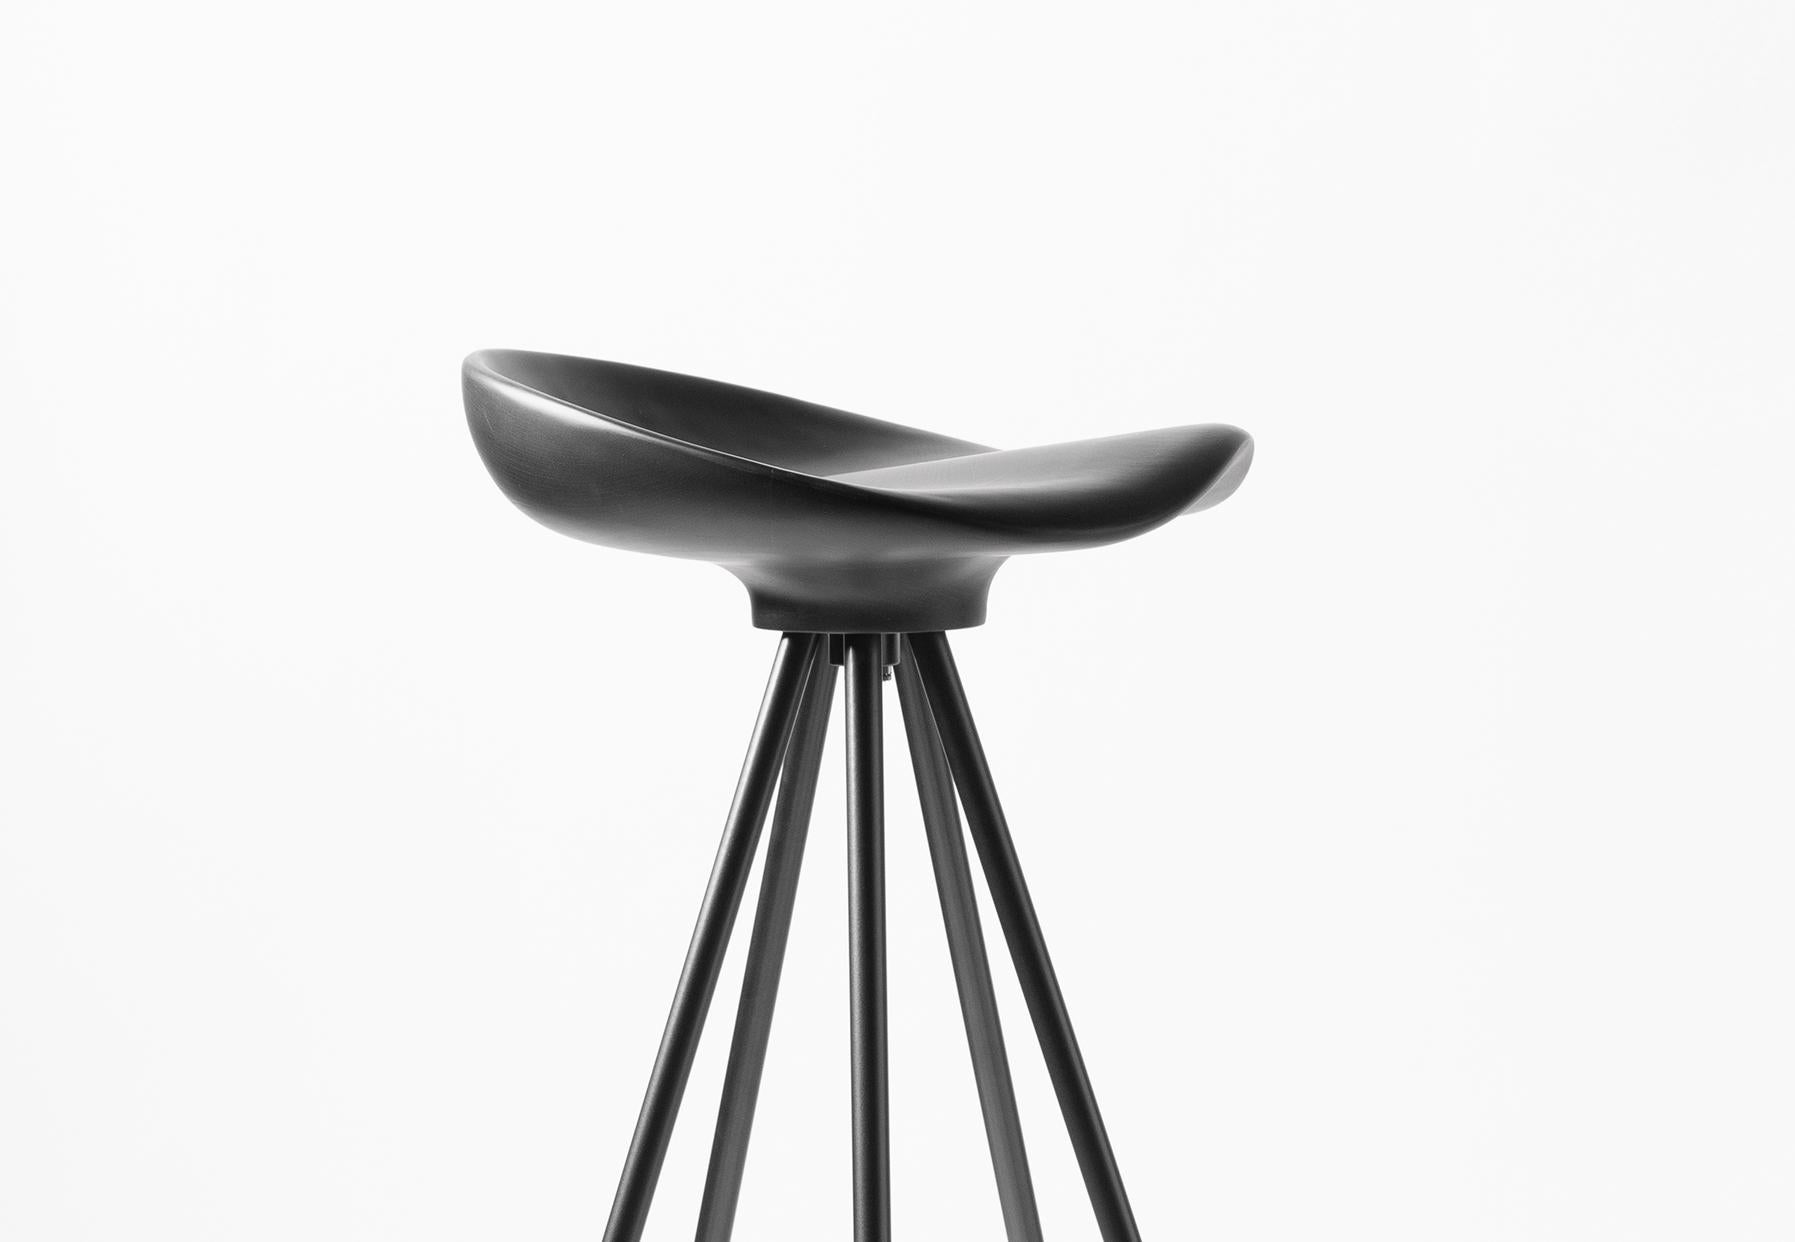 The Jamaica Stool is Spanish classic, and one of the best designed stools in history. Designed in 1991 by interior designer Pepe Cortes, the stool remains as modern as ever. Its materials and durabiluty make the chair idea for a variety of settings.